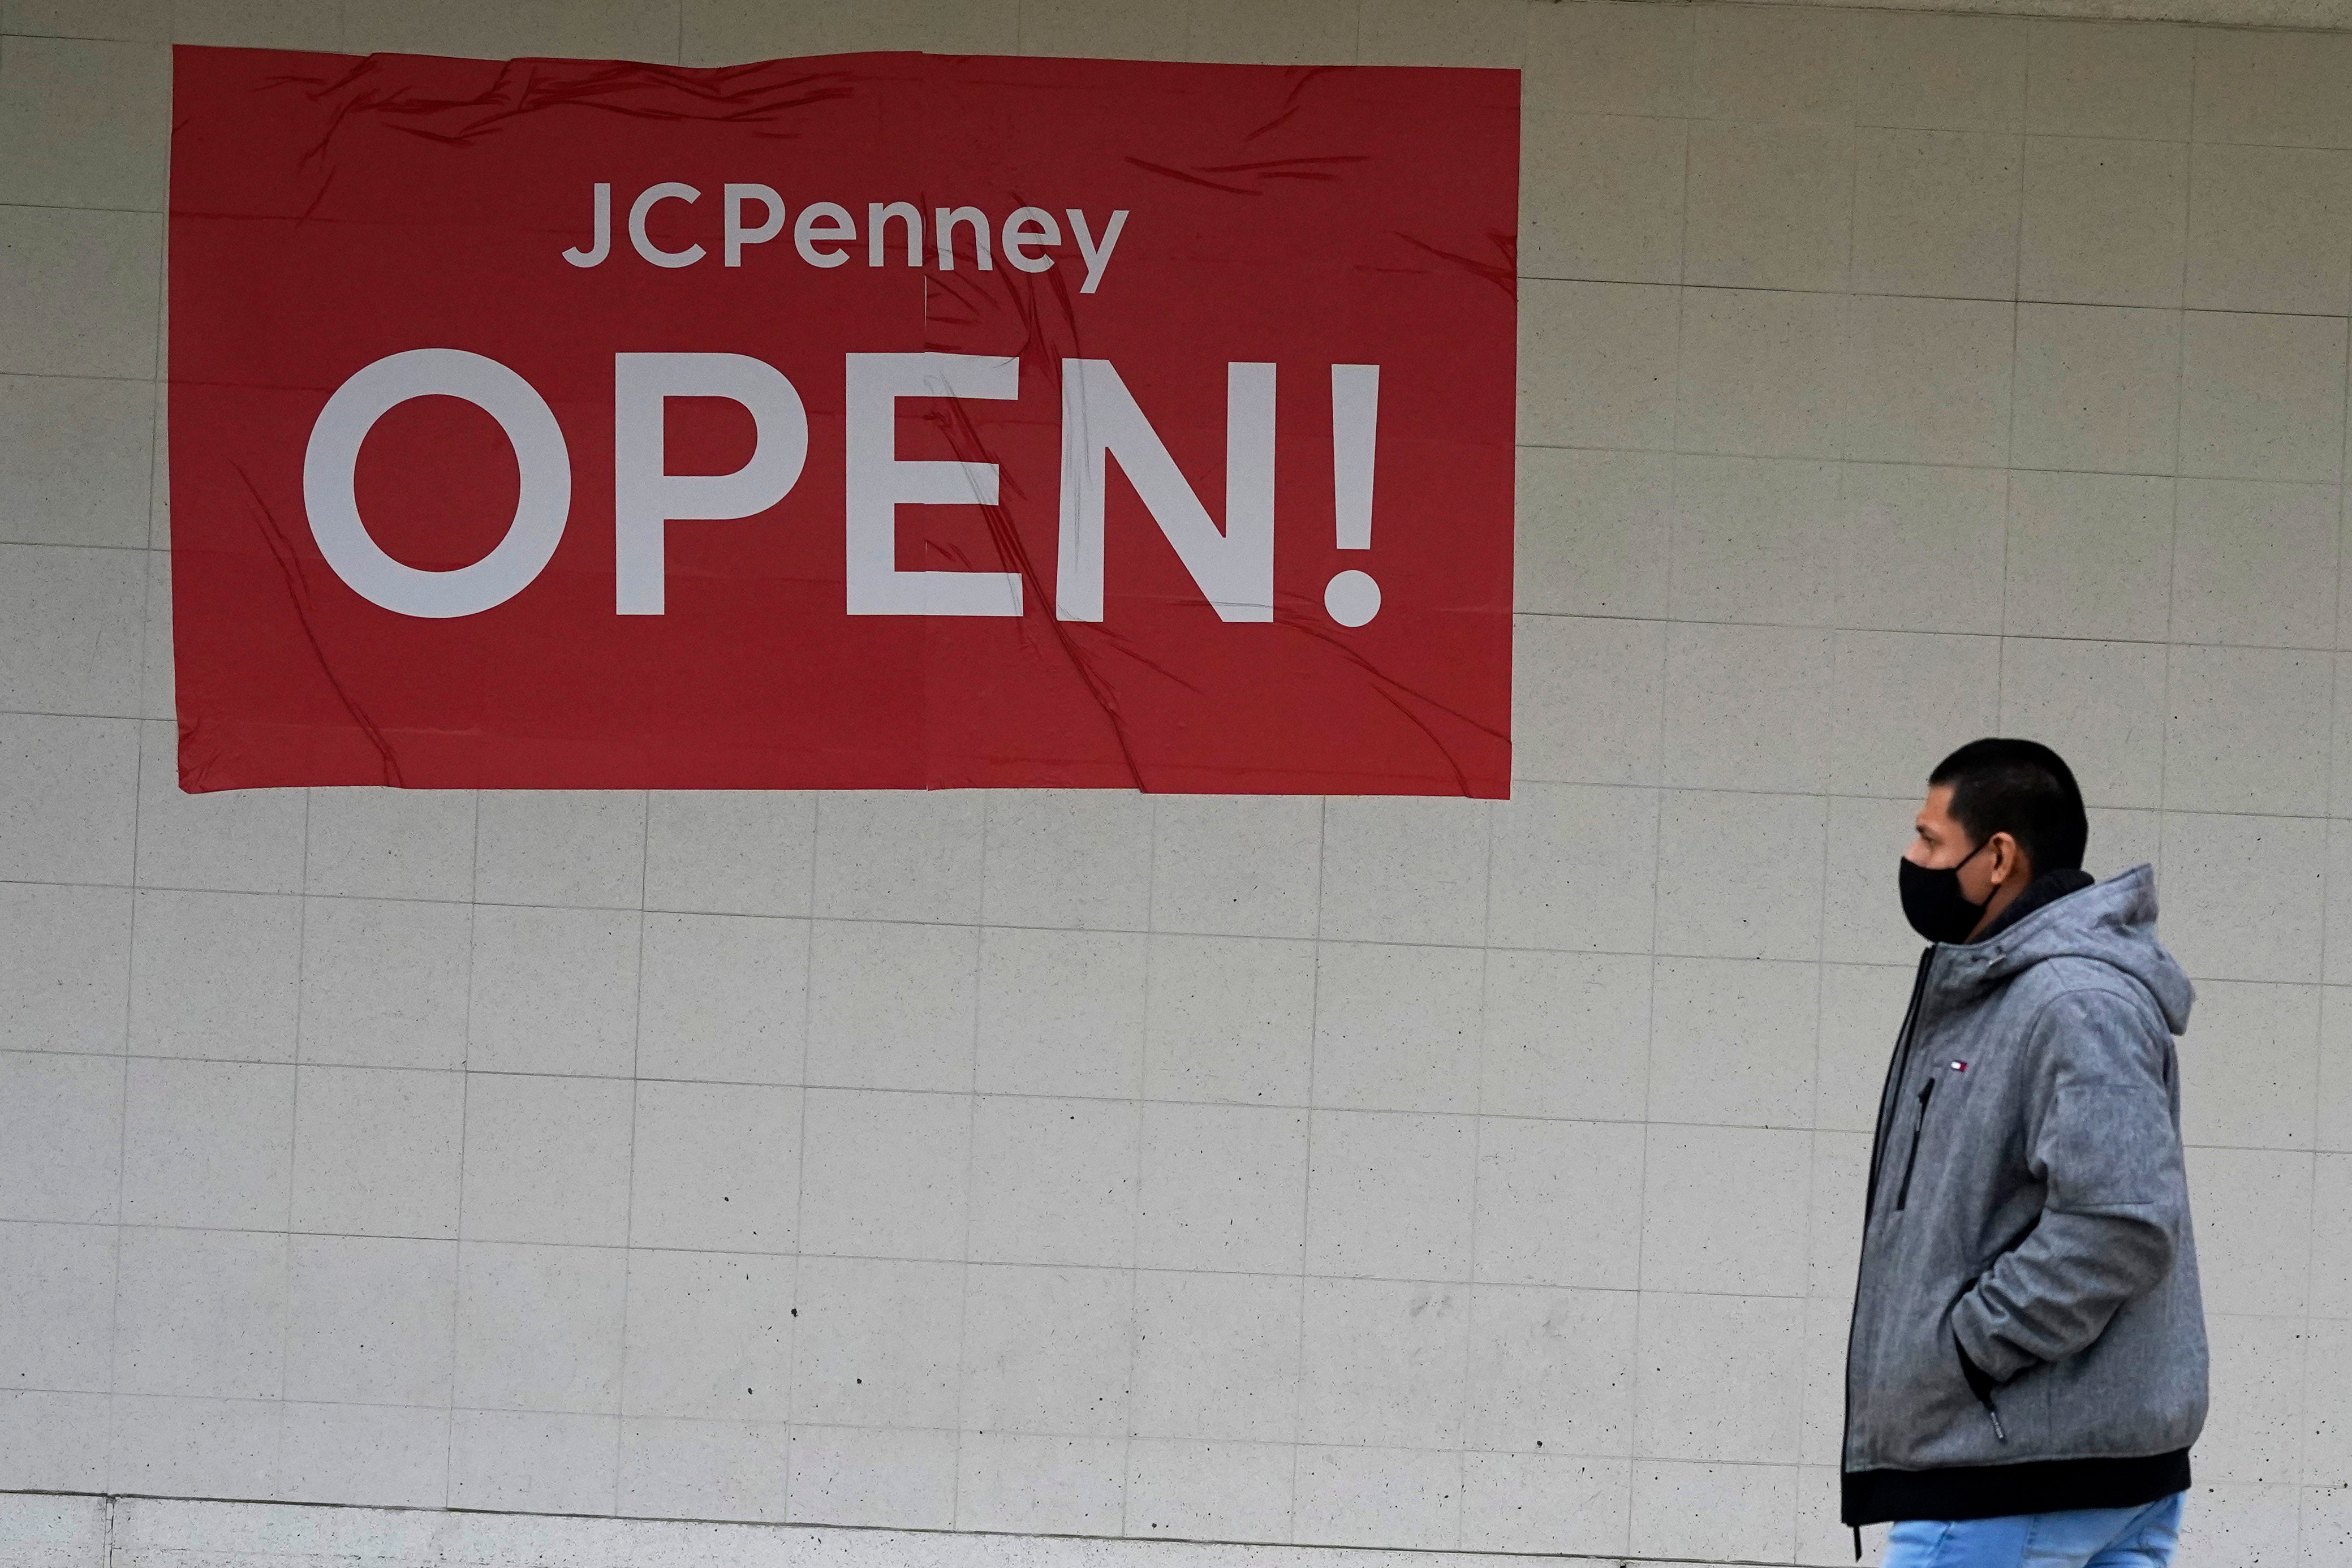 JCPenney launches new CEO search for new start